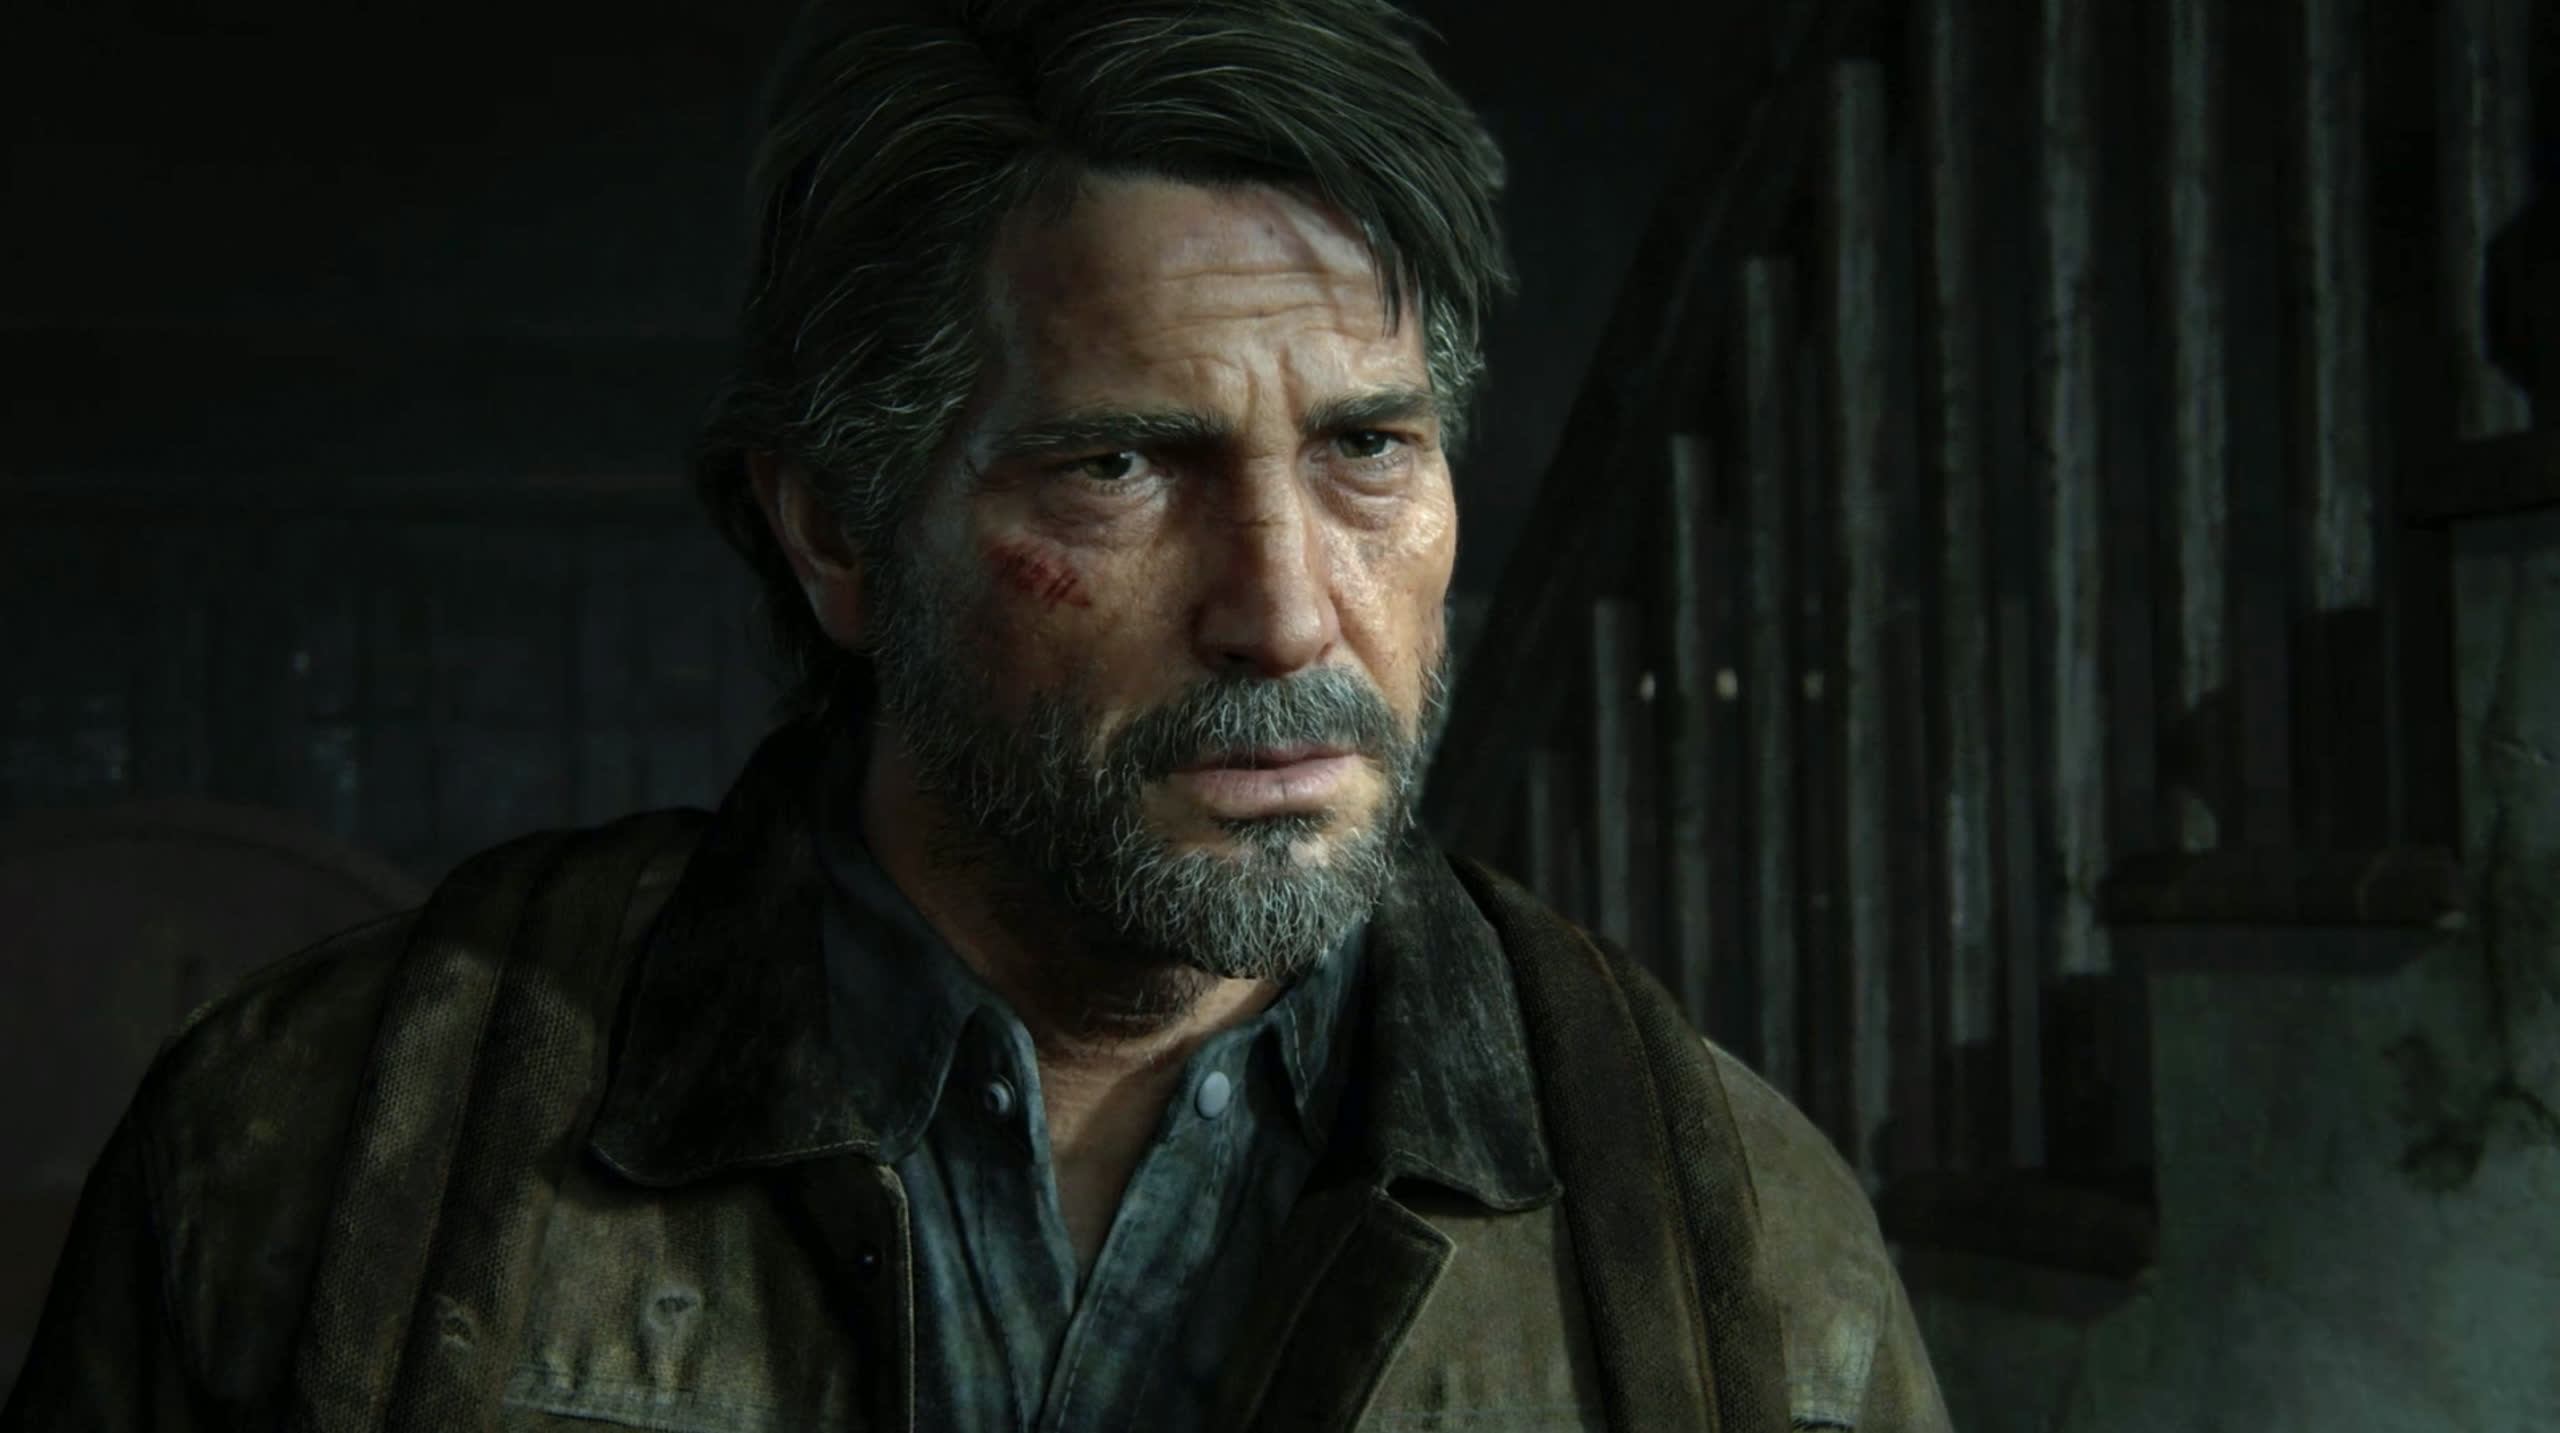 Naughty Dog is remaking The Last of Us again, and not everybody is happy about it